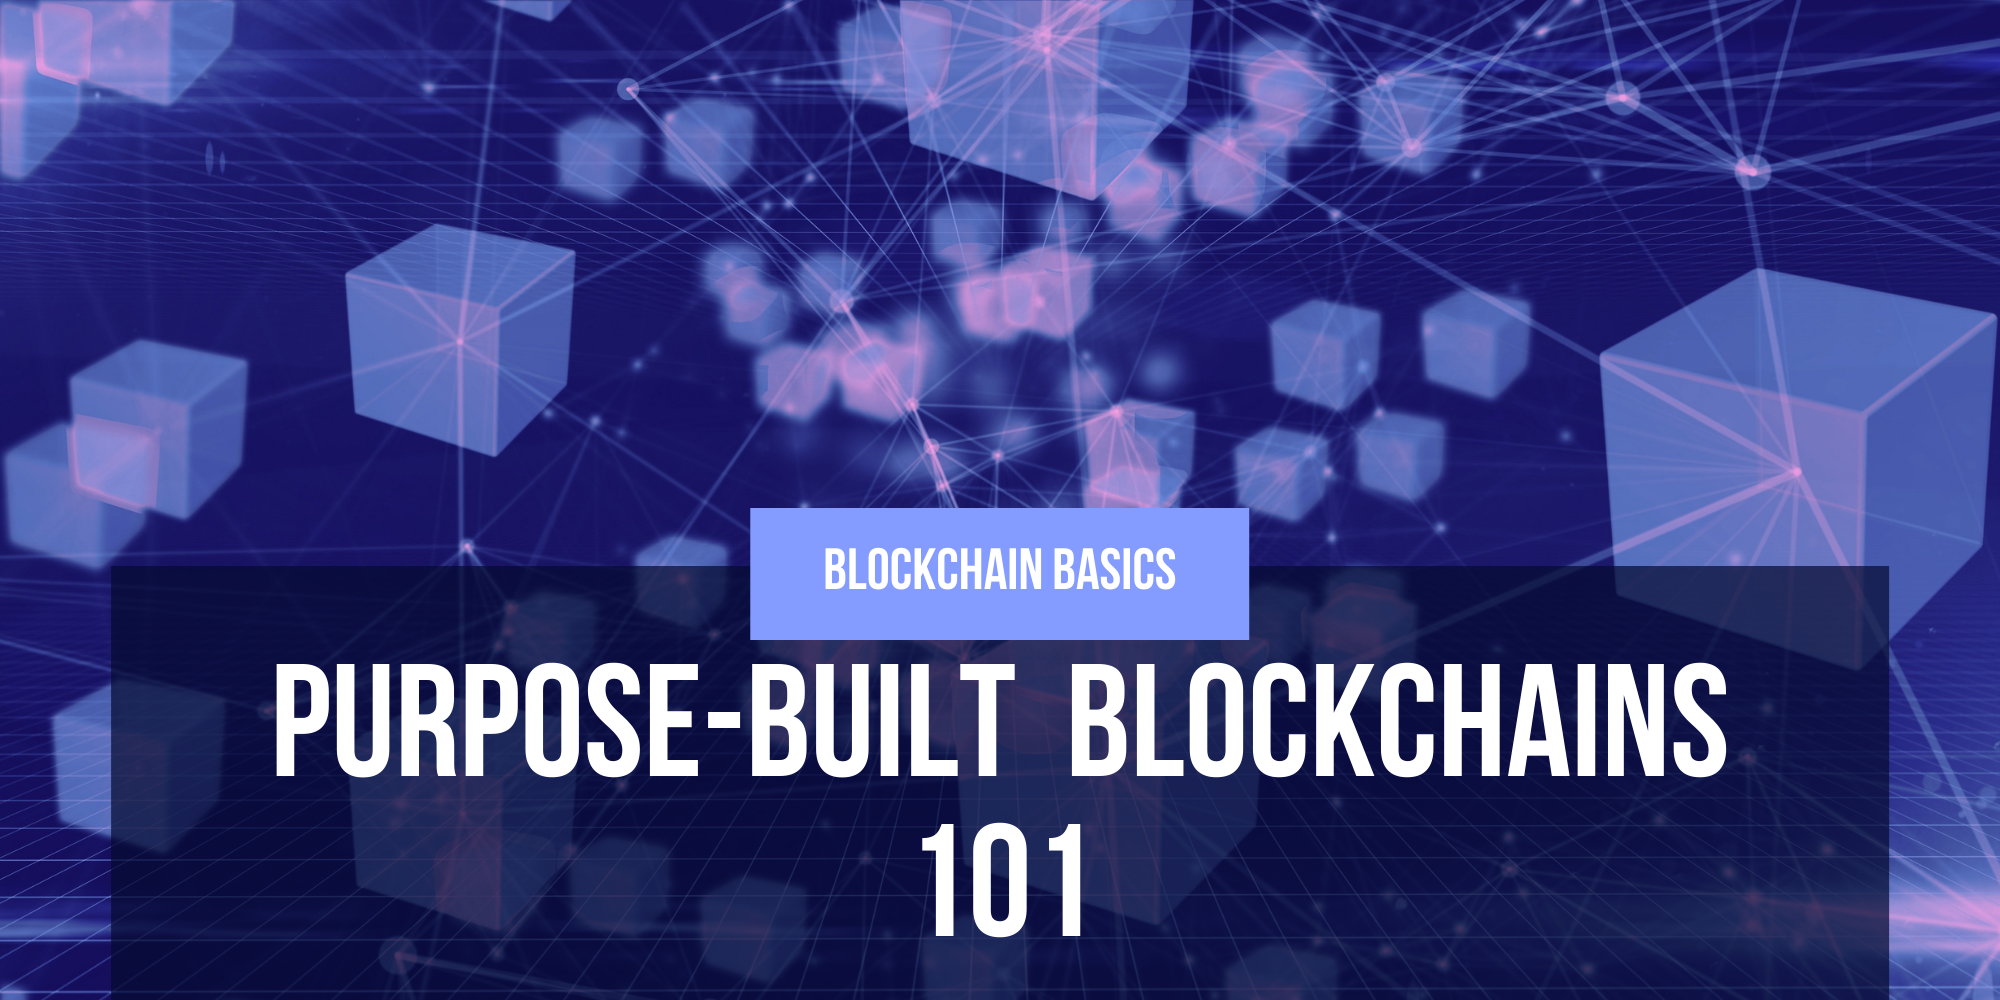 A Guide to Purpose-Built Blockchains